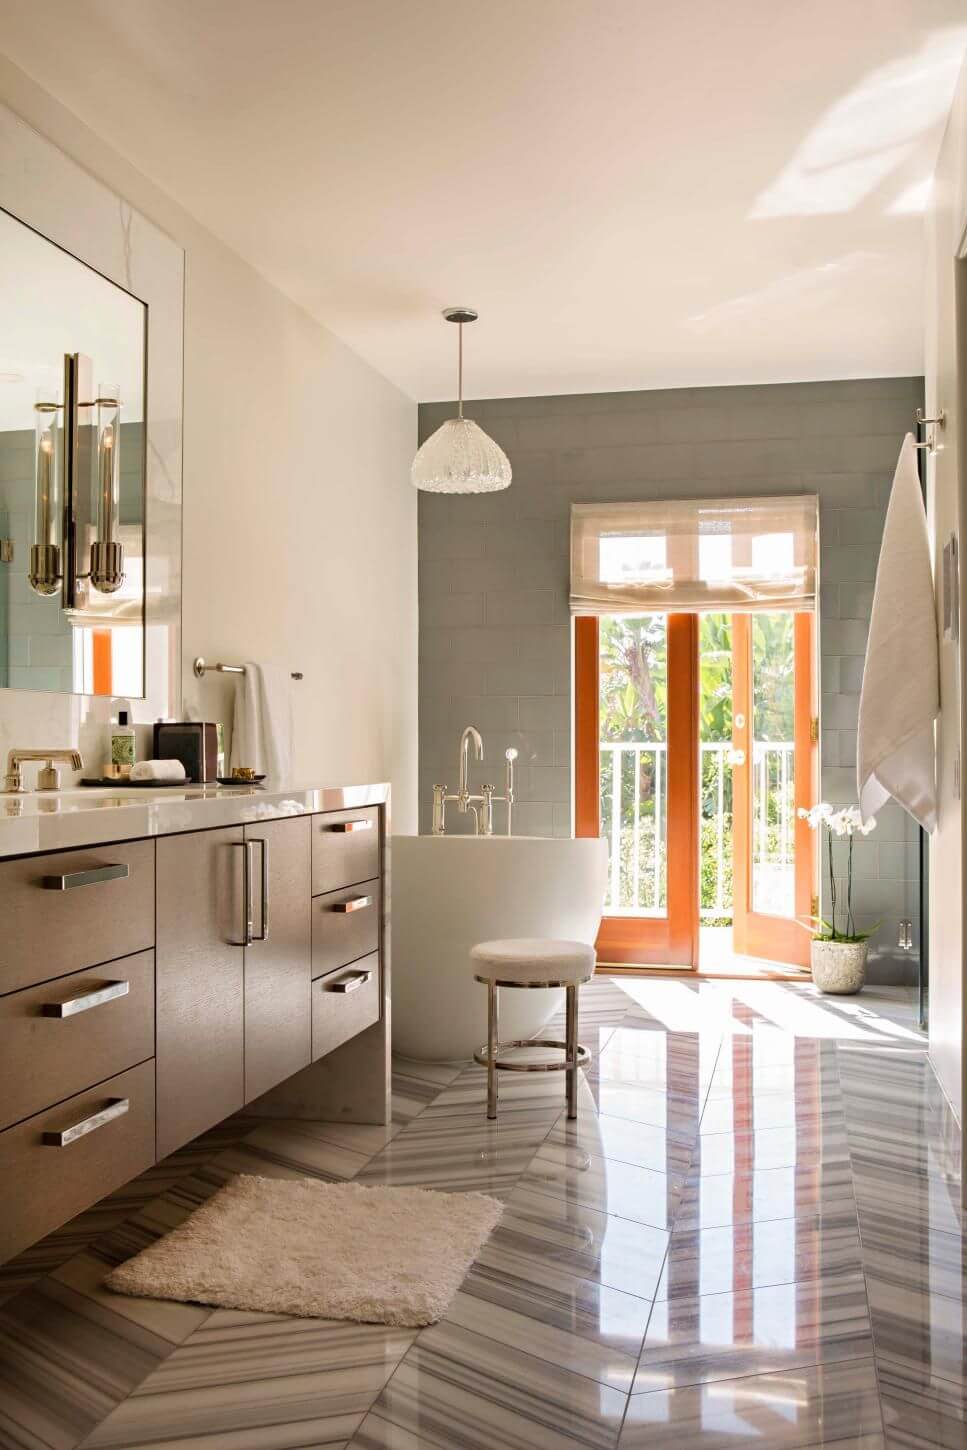 Soothing cream and gray bathroom paint colors